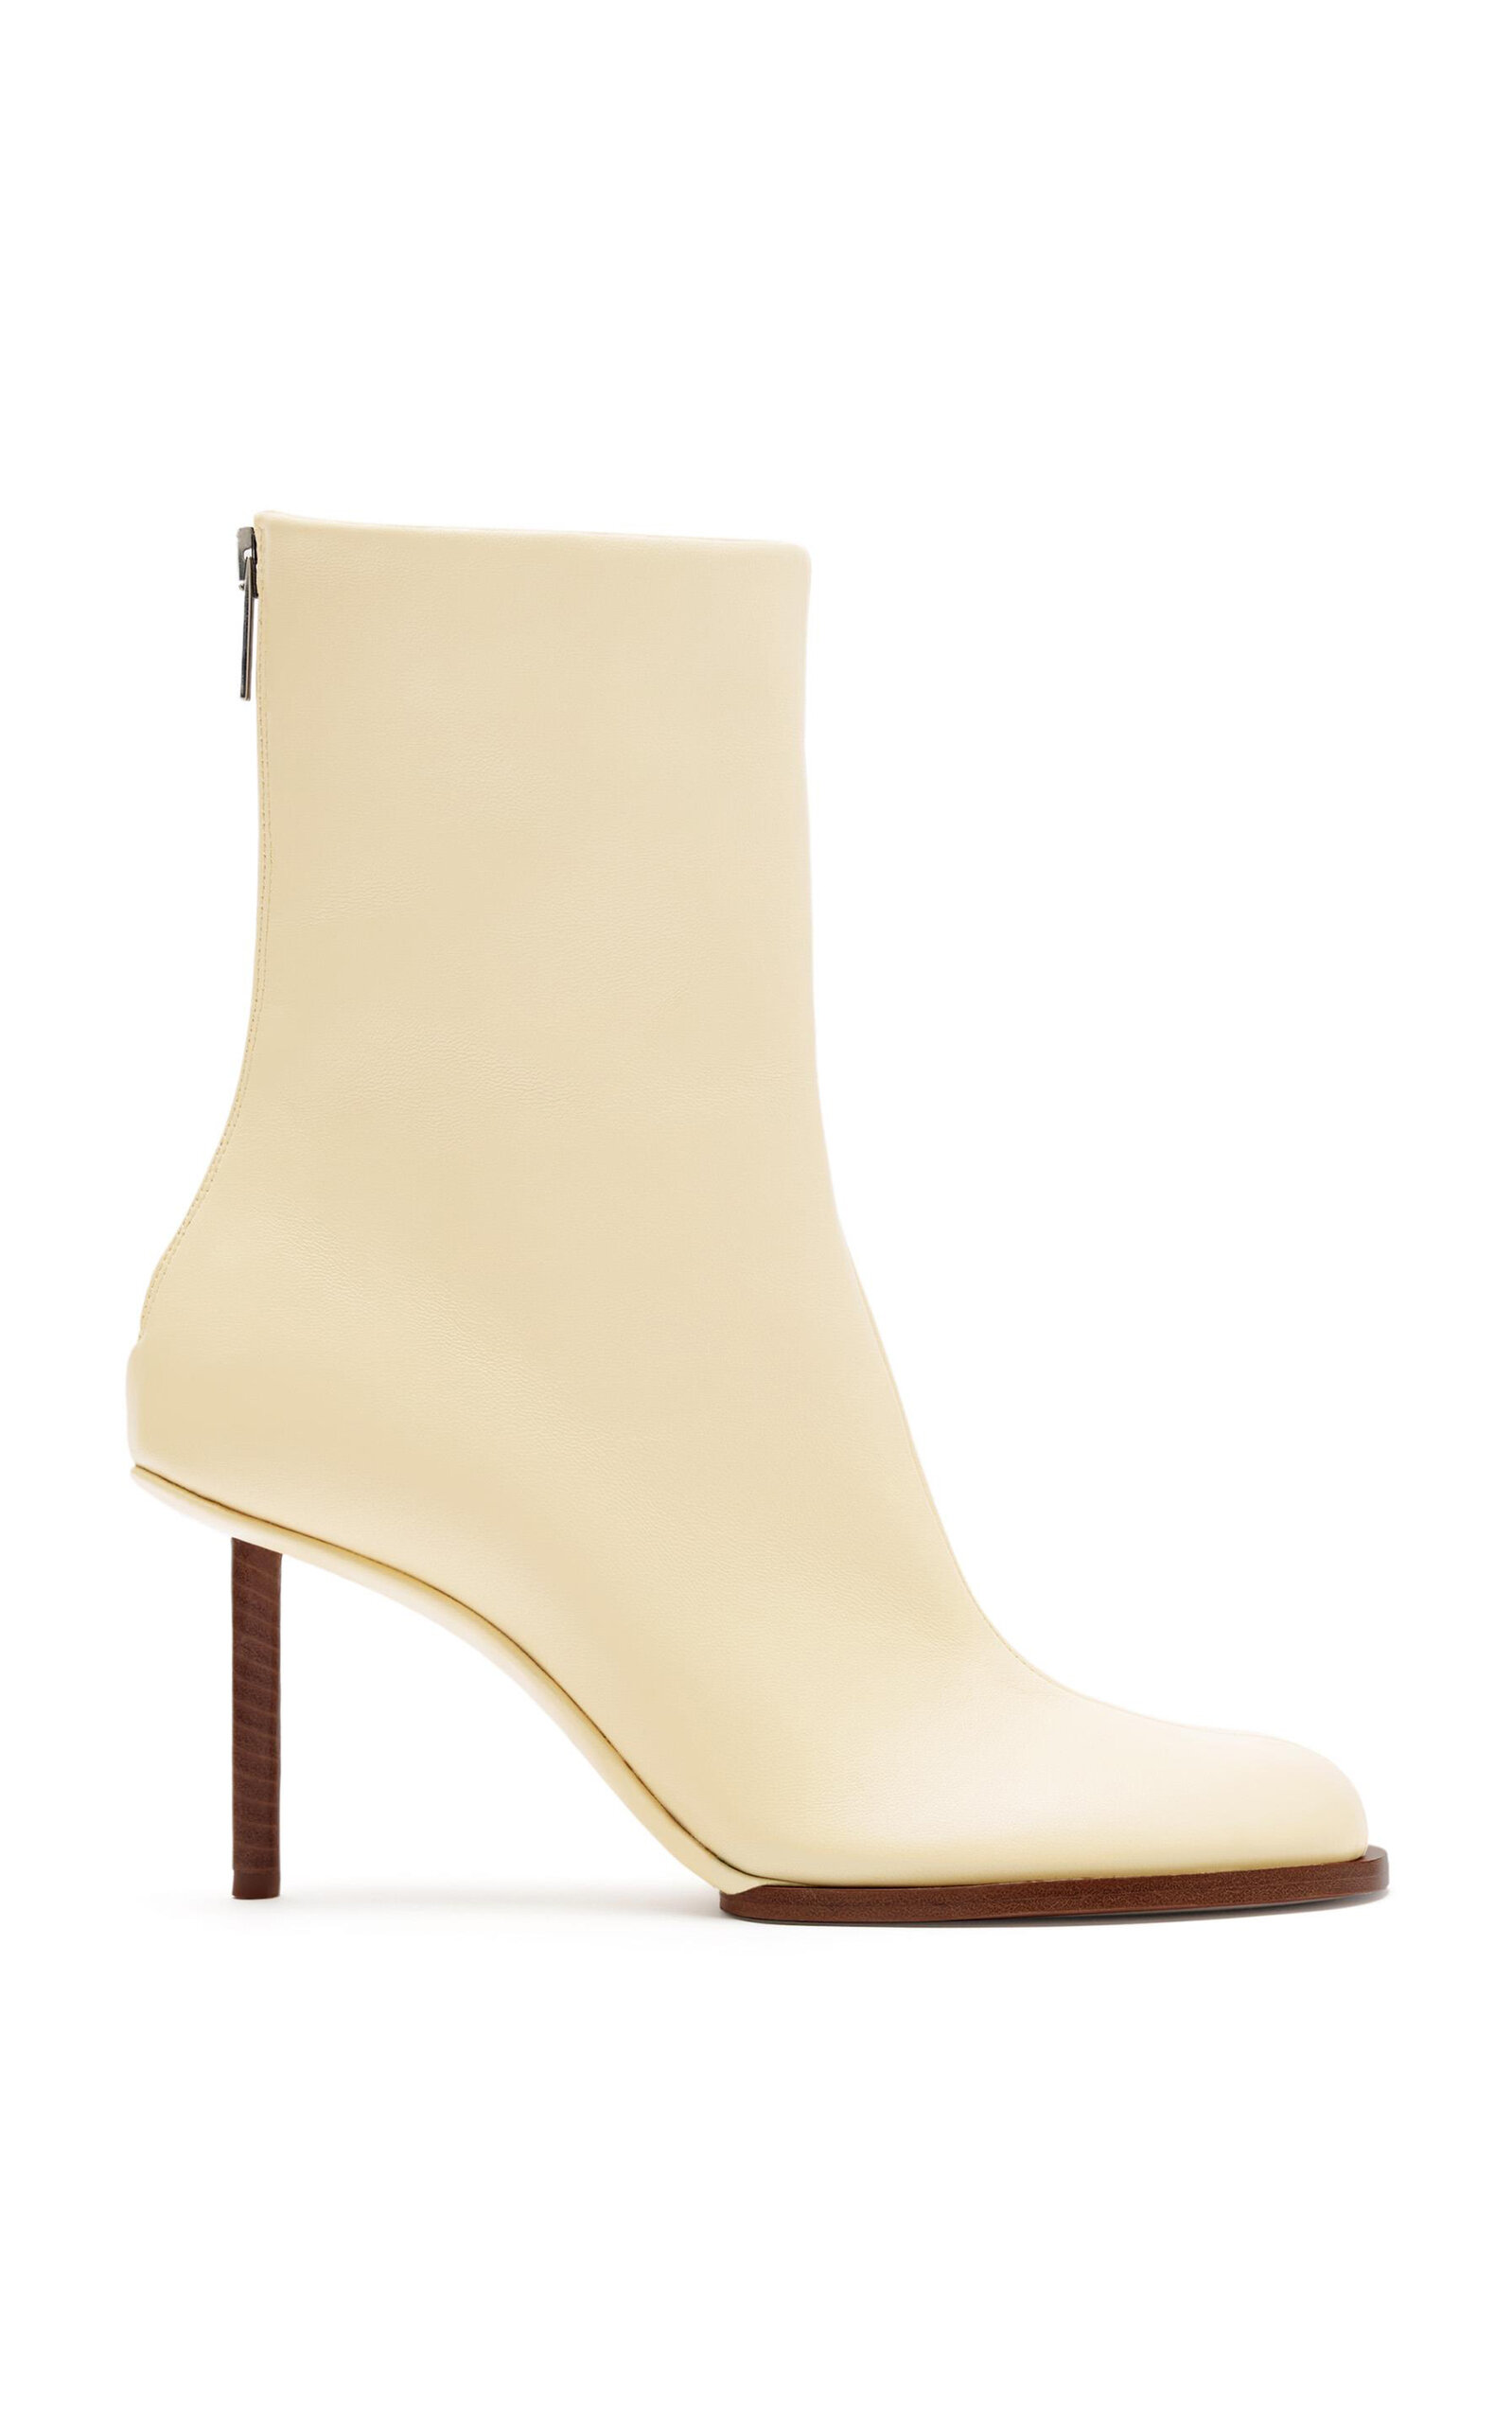 JACQUEMUS ROND CARRE LEATHER ANKLE BOOTS